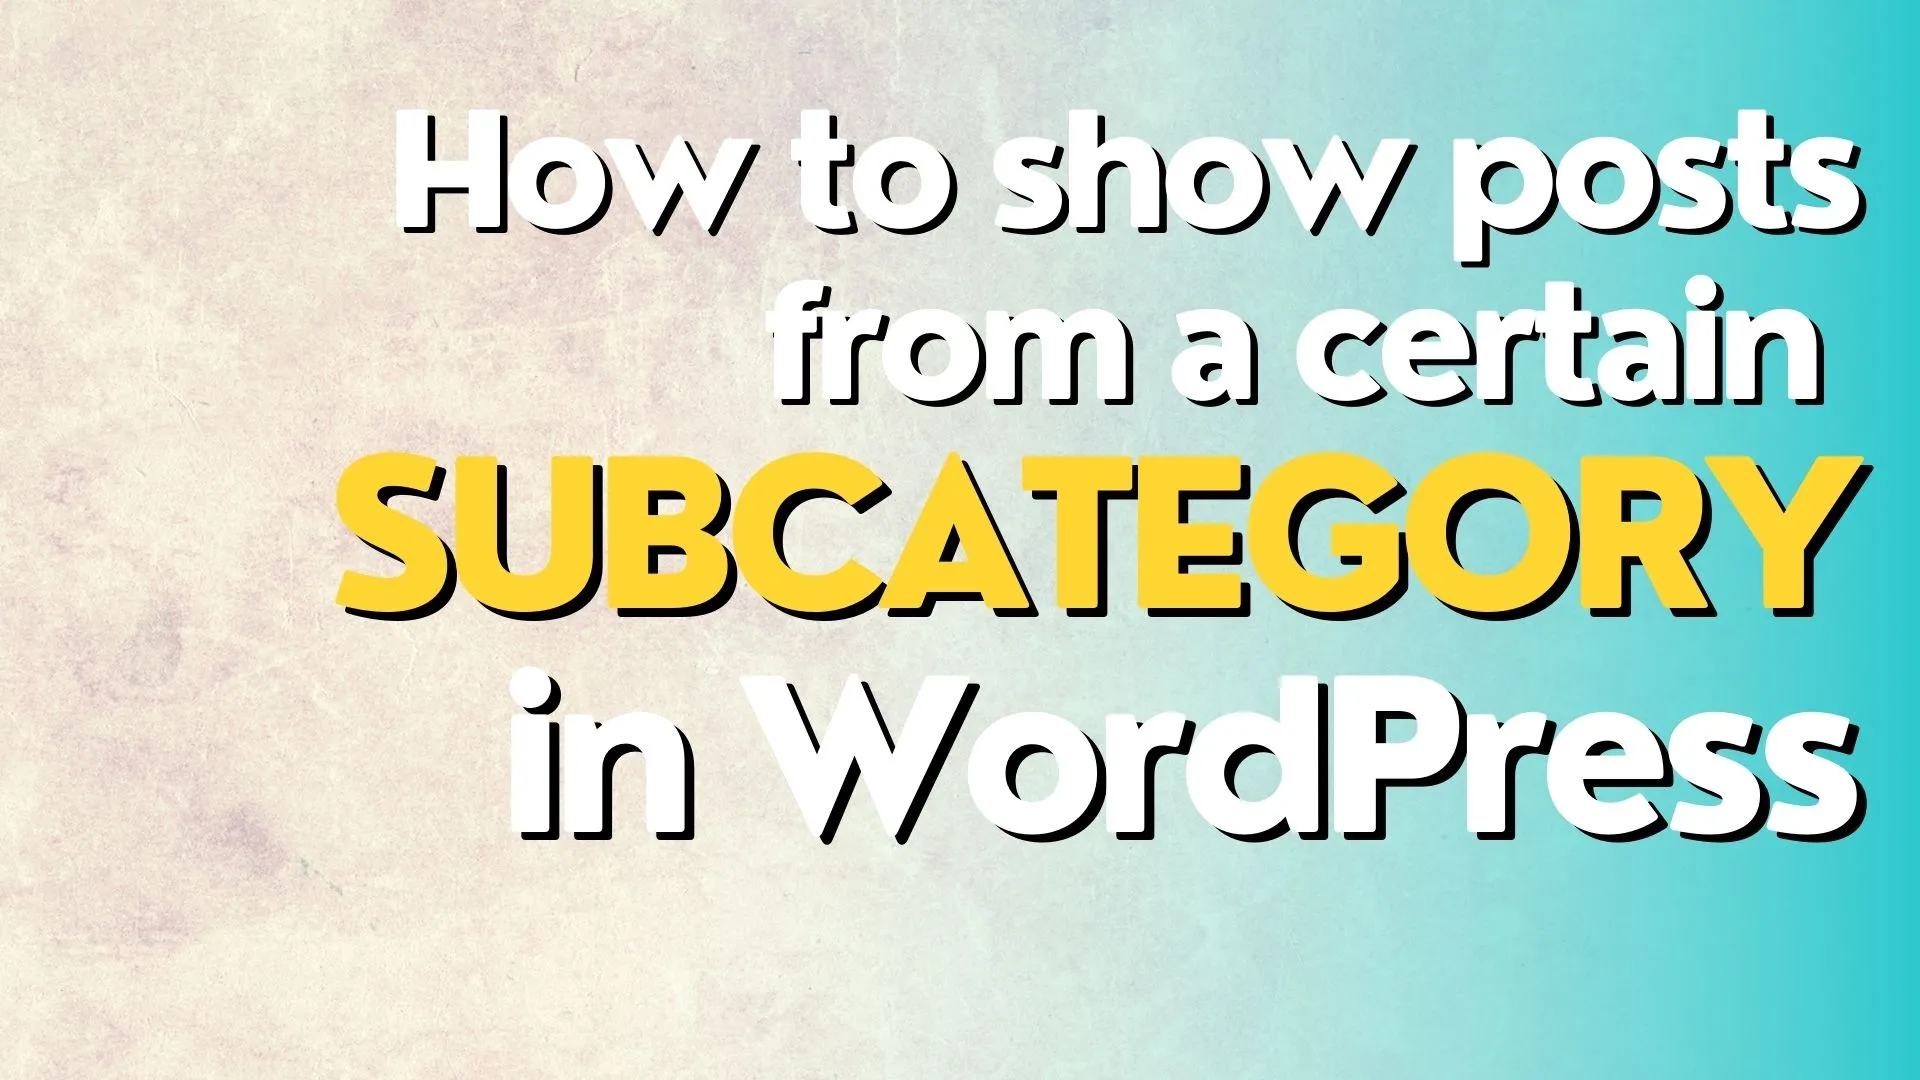 You are currently viewing How to show posts from a certain subcategory in WordPress